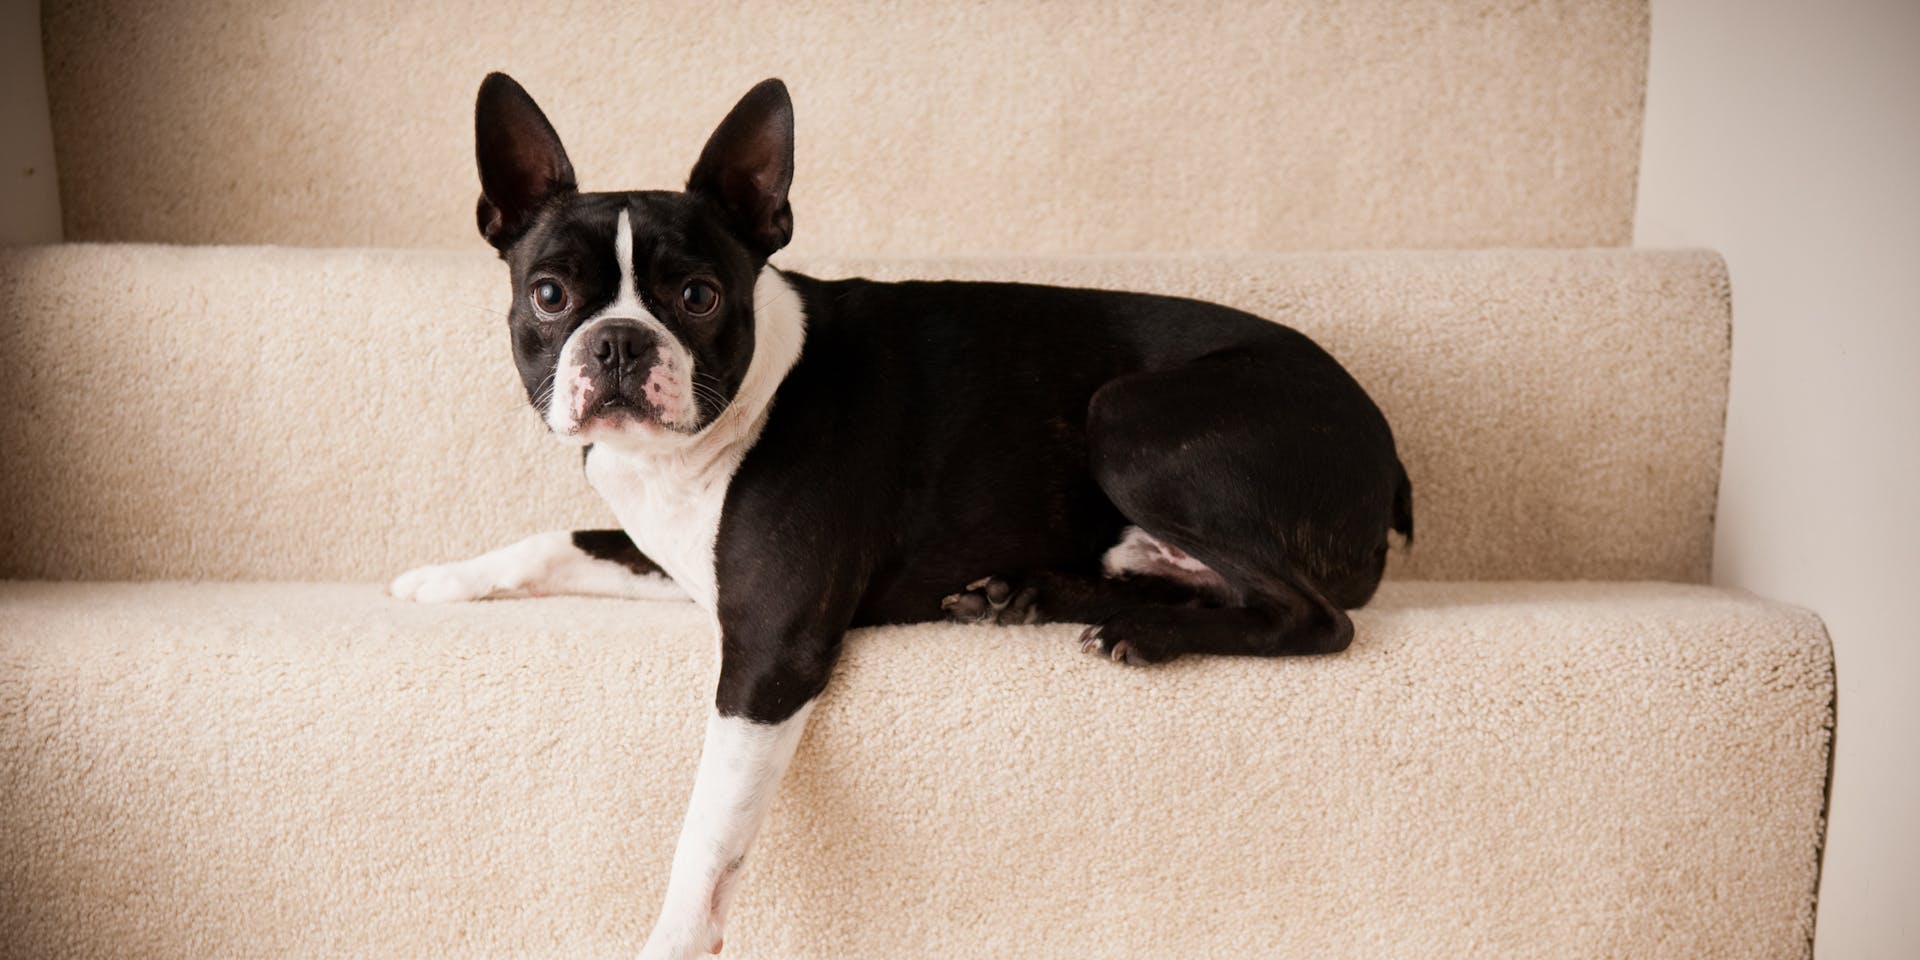 A Boston Terrier resting on some stairs indoors